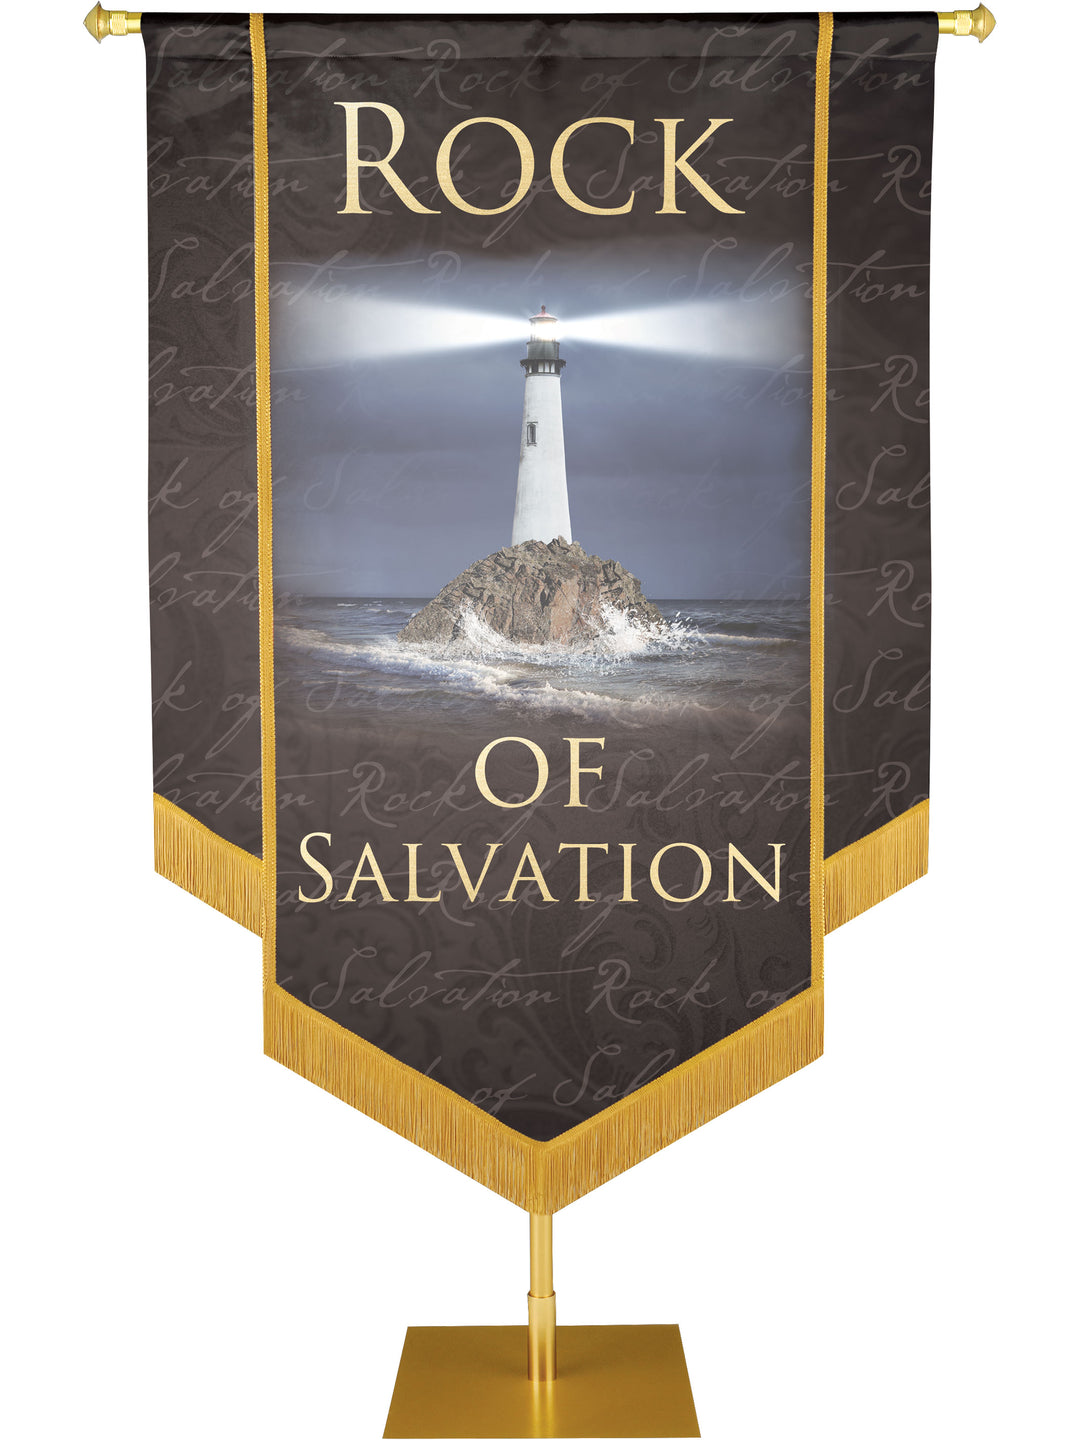 Names of Christ Rock of Salvation Embellished Banner - Handcrafted Banners - PraiseBanners